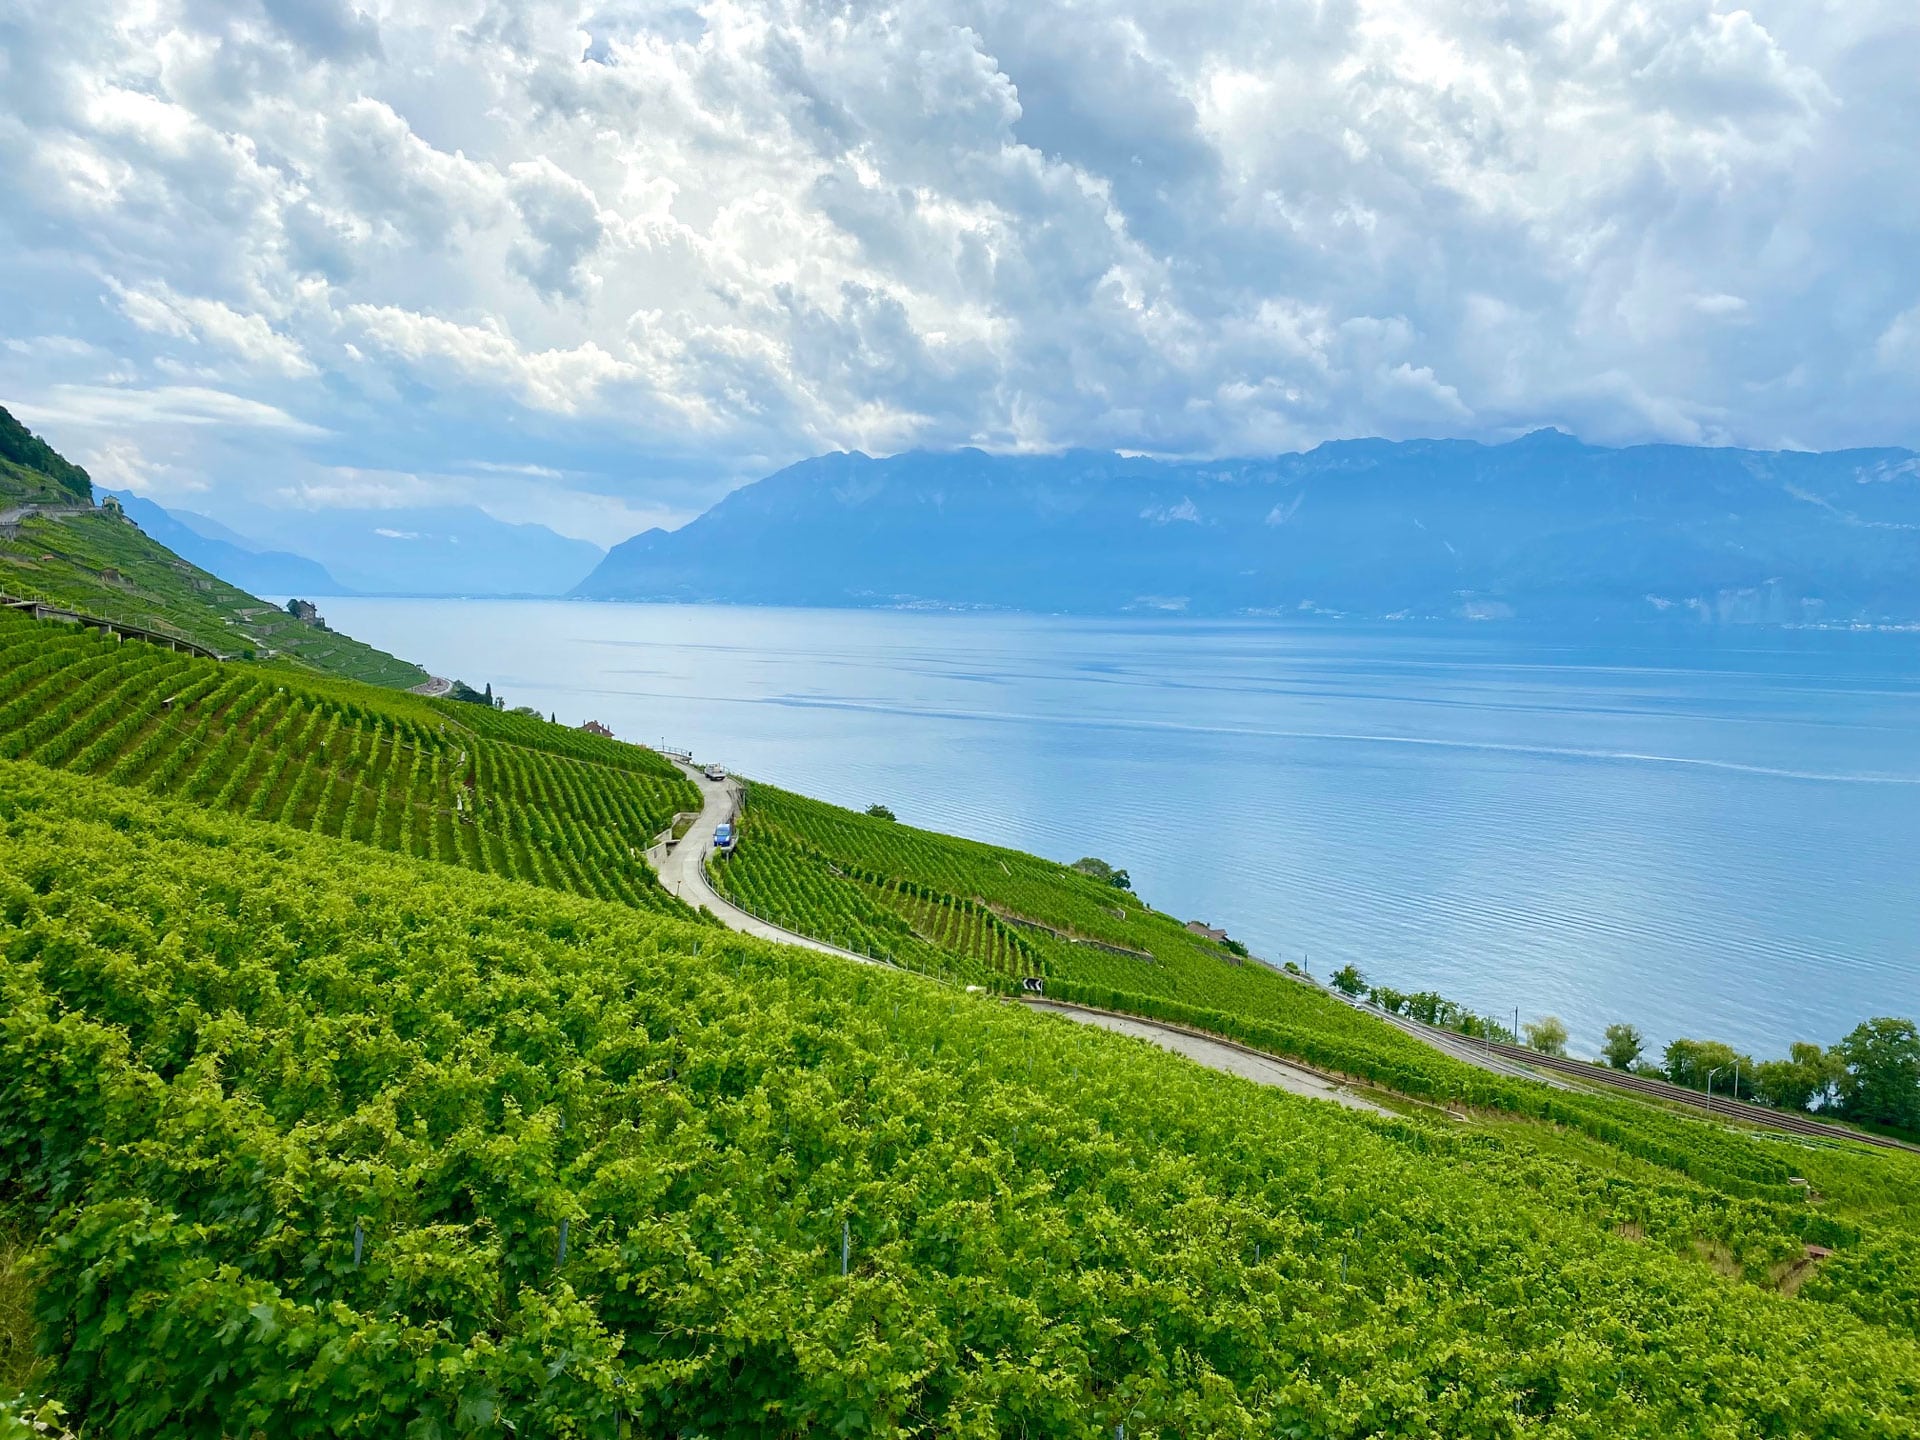 Western Switzerland 2 Days Private Tour – Between must-see places & hidden gems – Montreux, Vineyards & Grand Canyon of Switzerland (Bern)